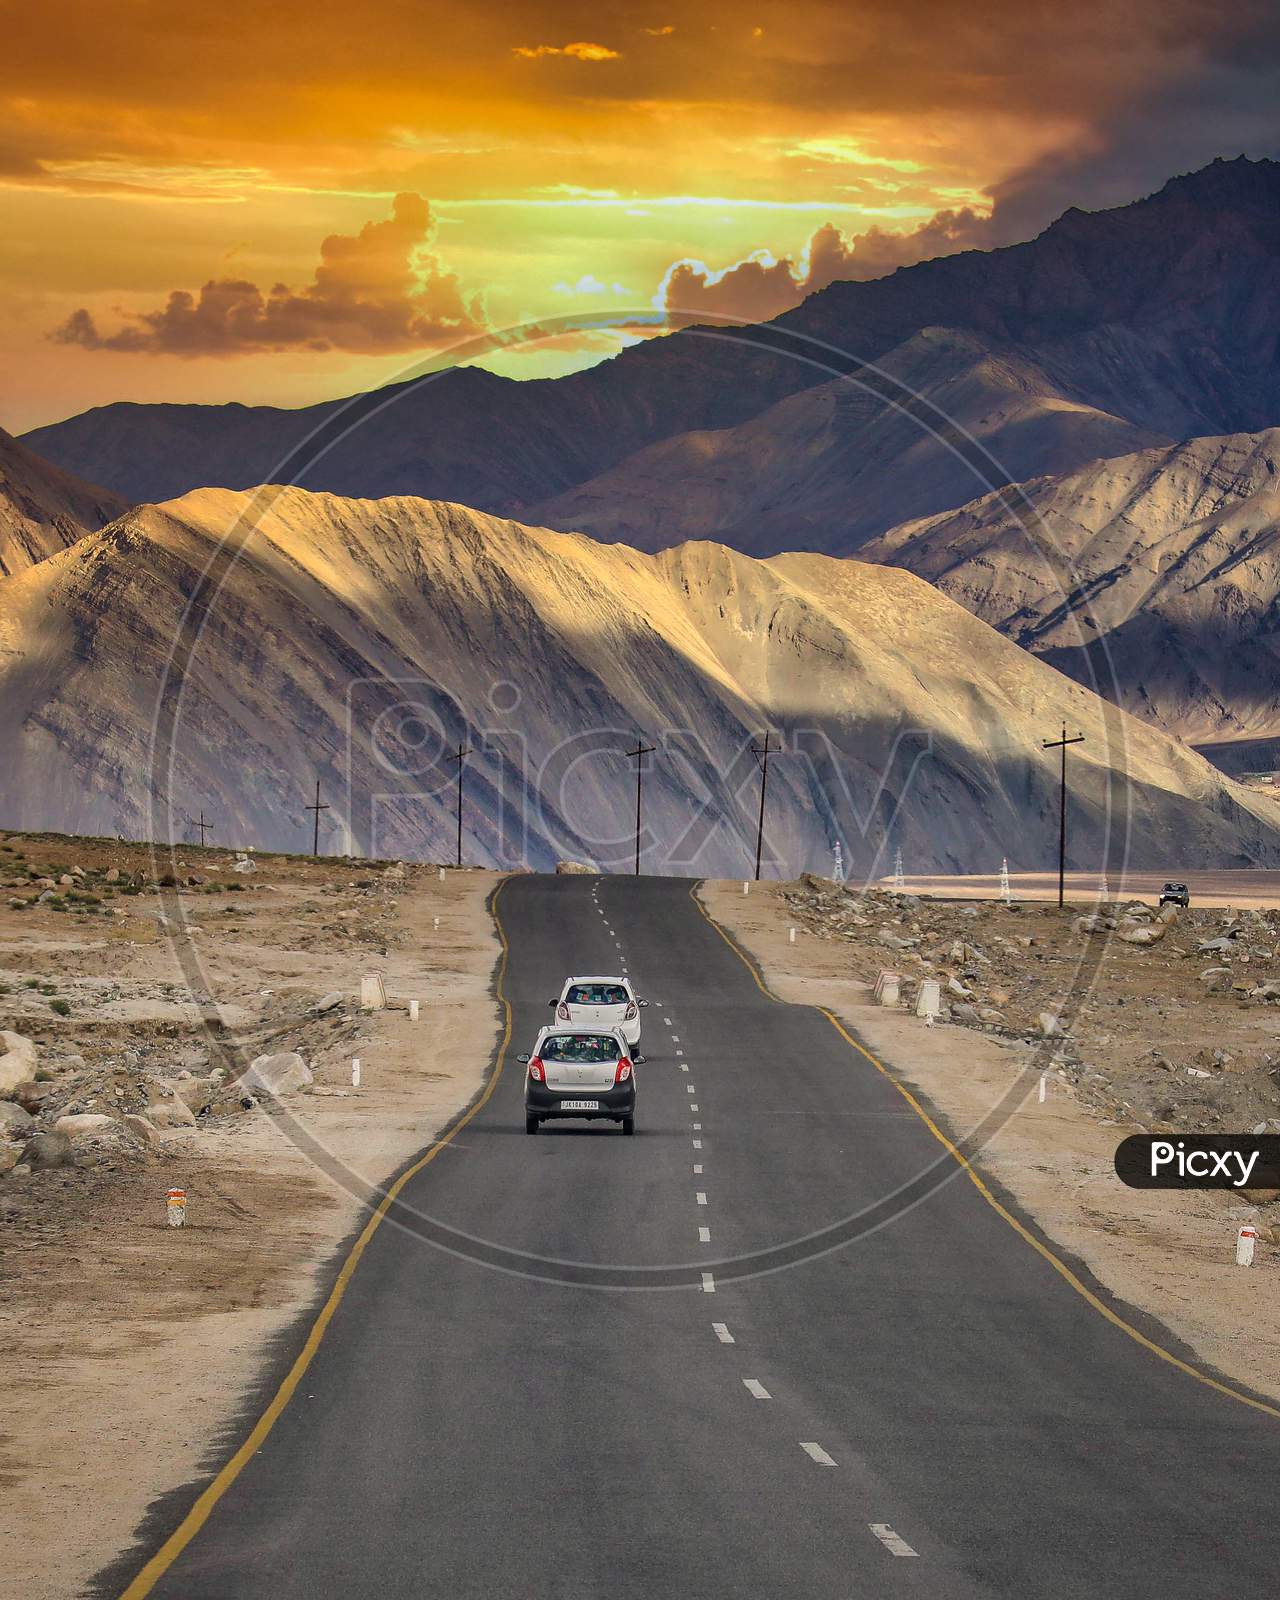 Vehicles on NH1 Road In Leh With Snow Filed Mountains in Background And Sunset Sky